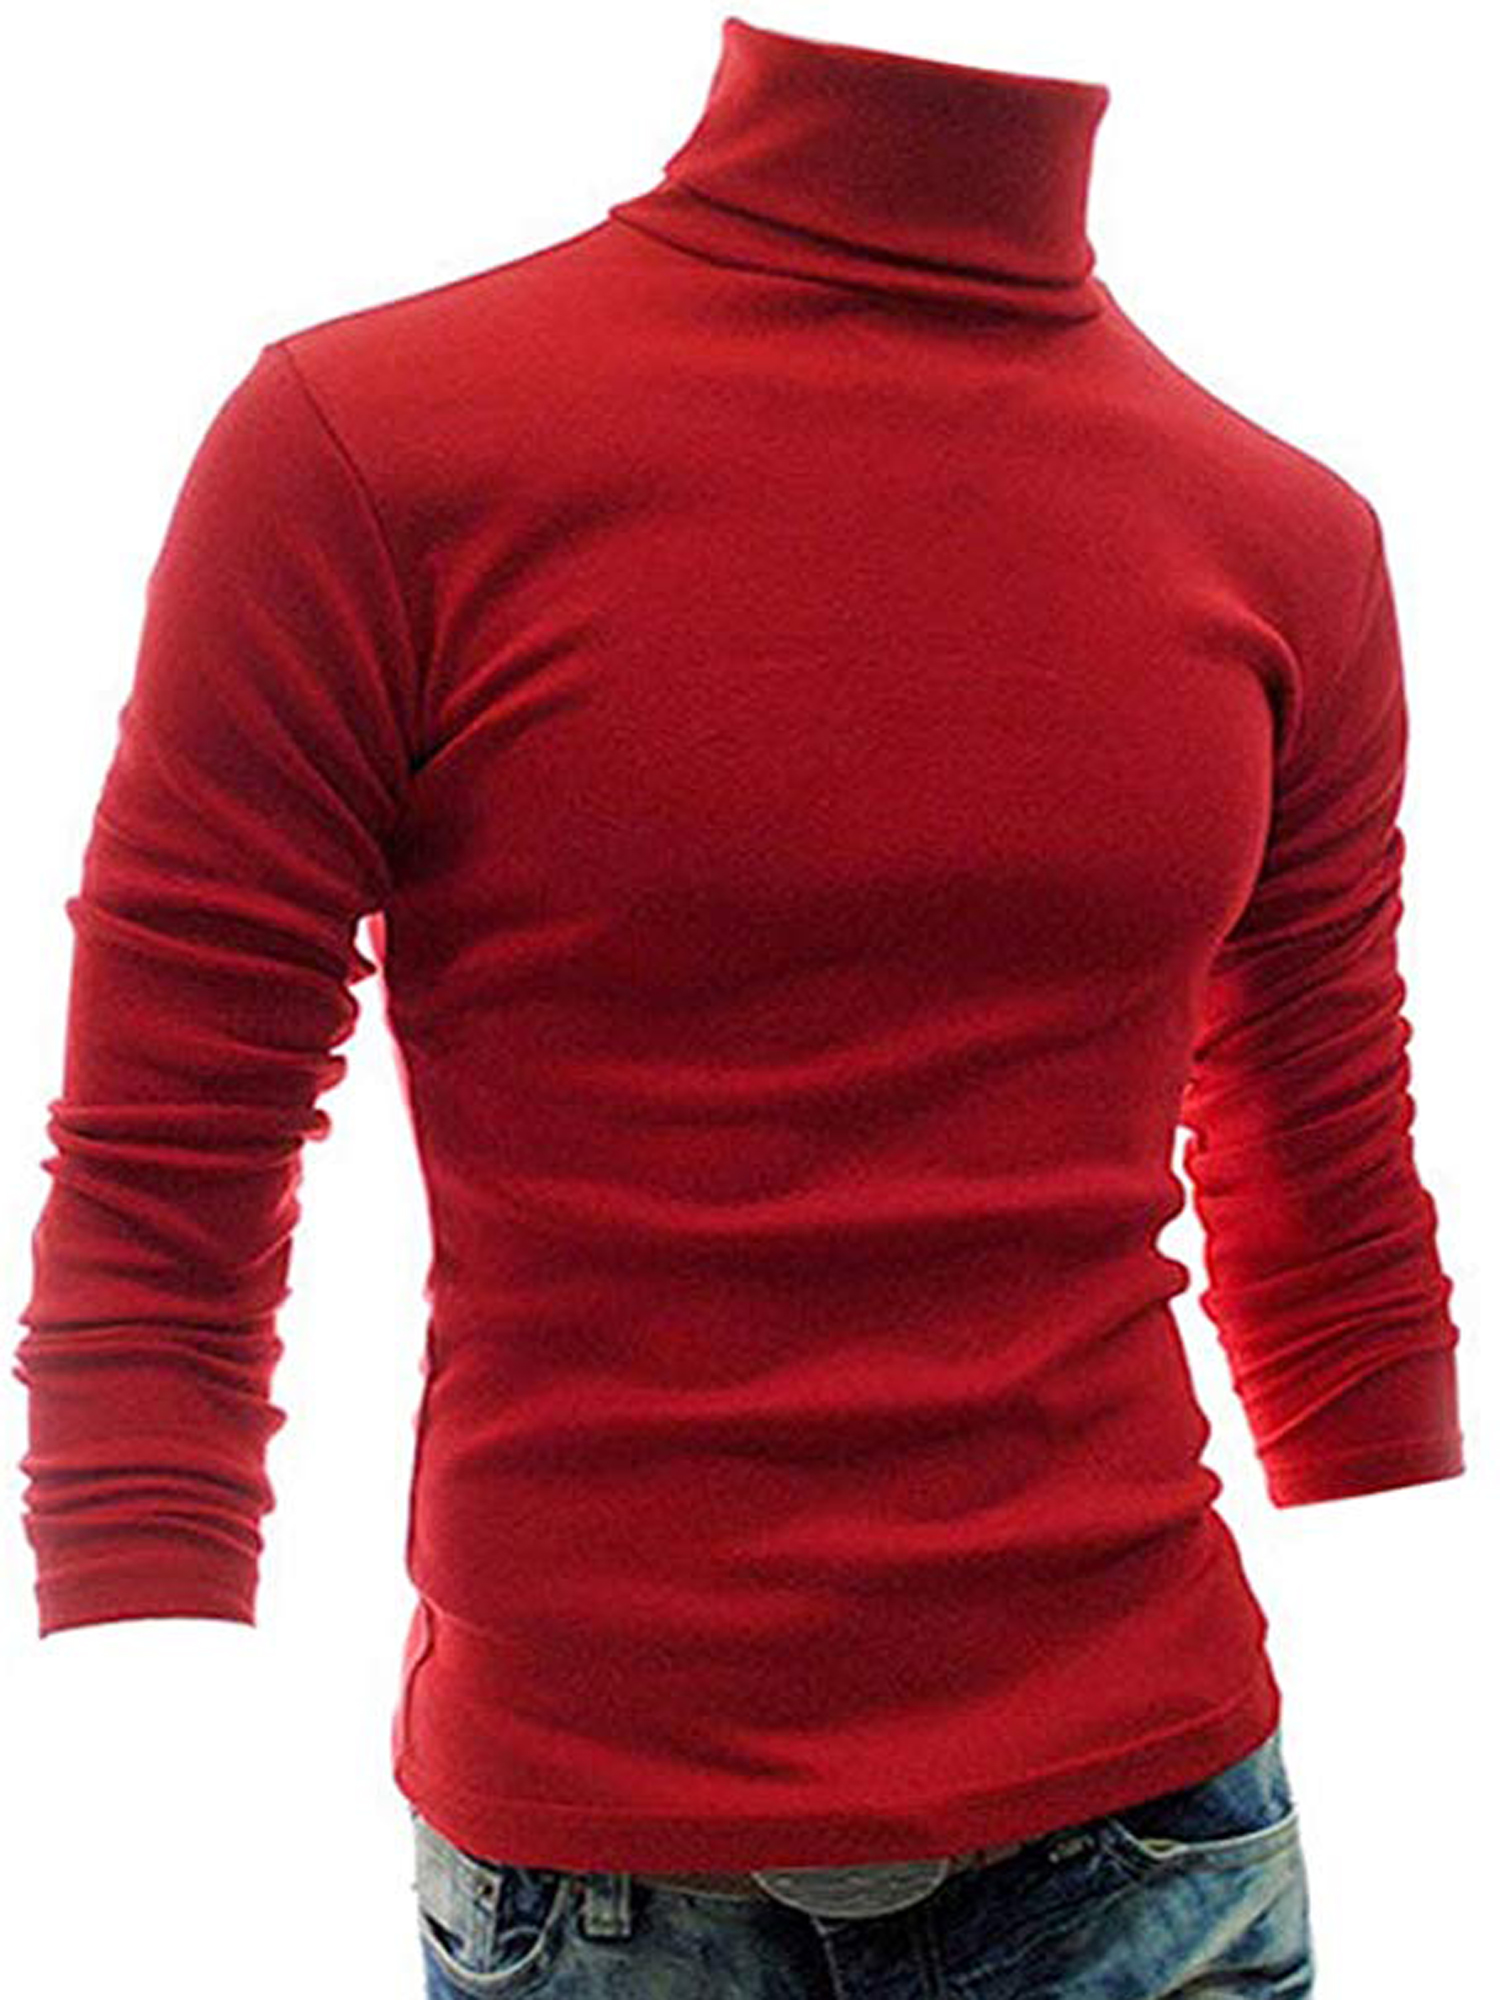 Dewadbow Men Roll Turtle Neck Pullover Knitted Jumper Tops Sweater Shirt - image 1 of 2